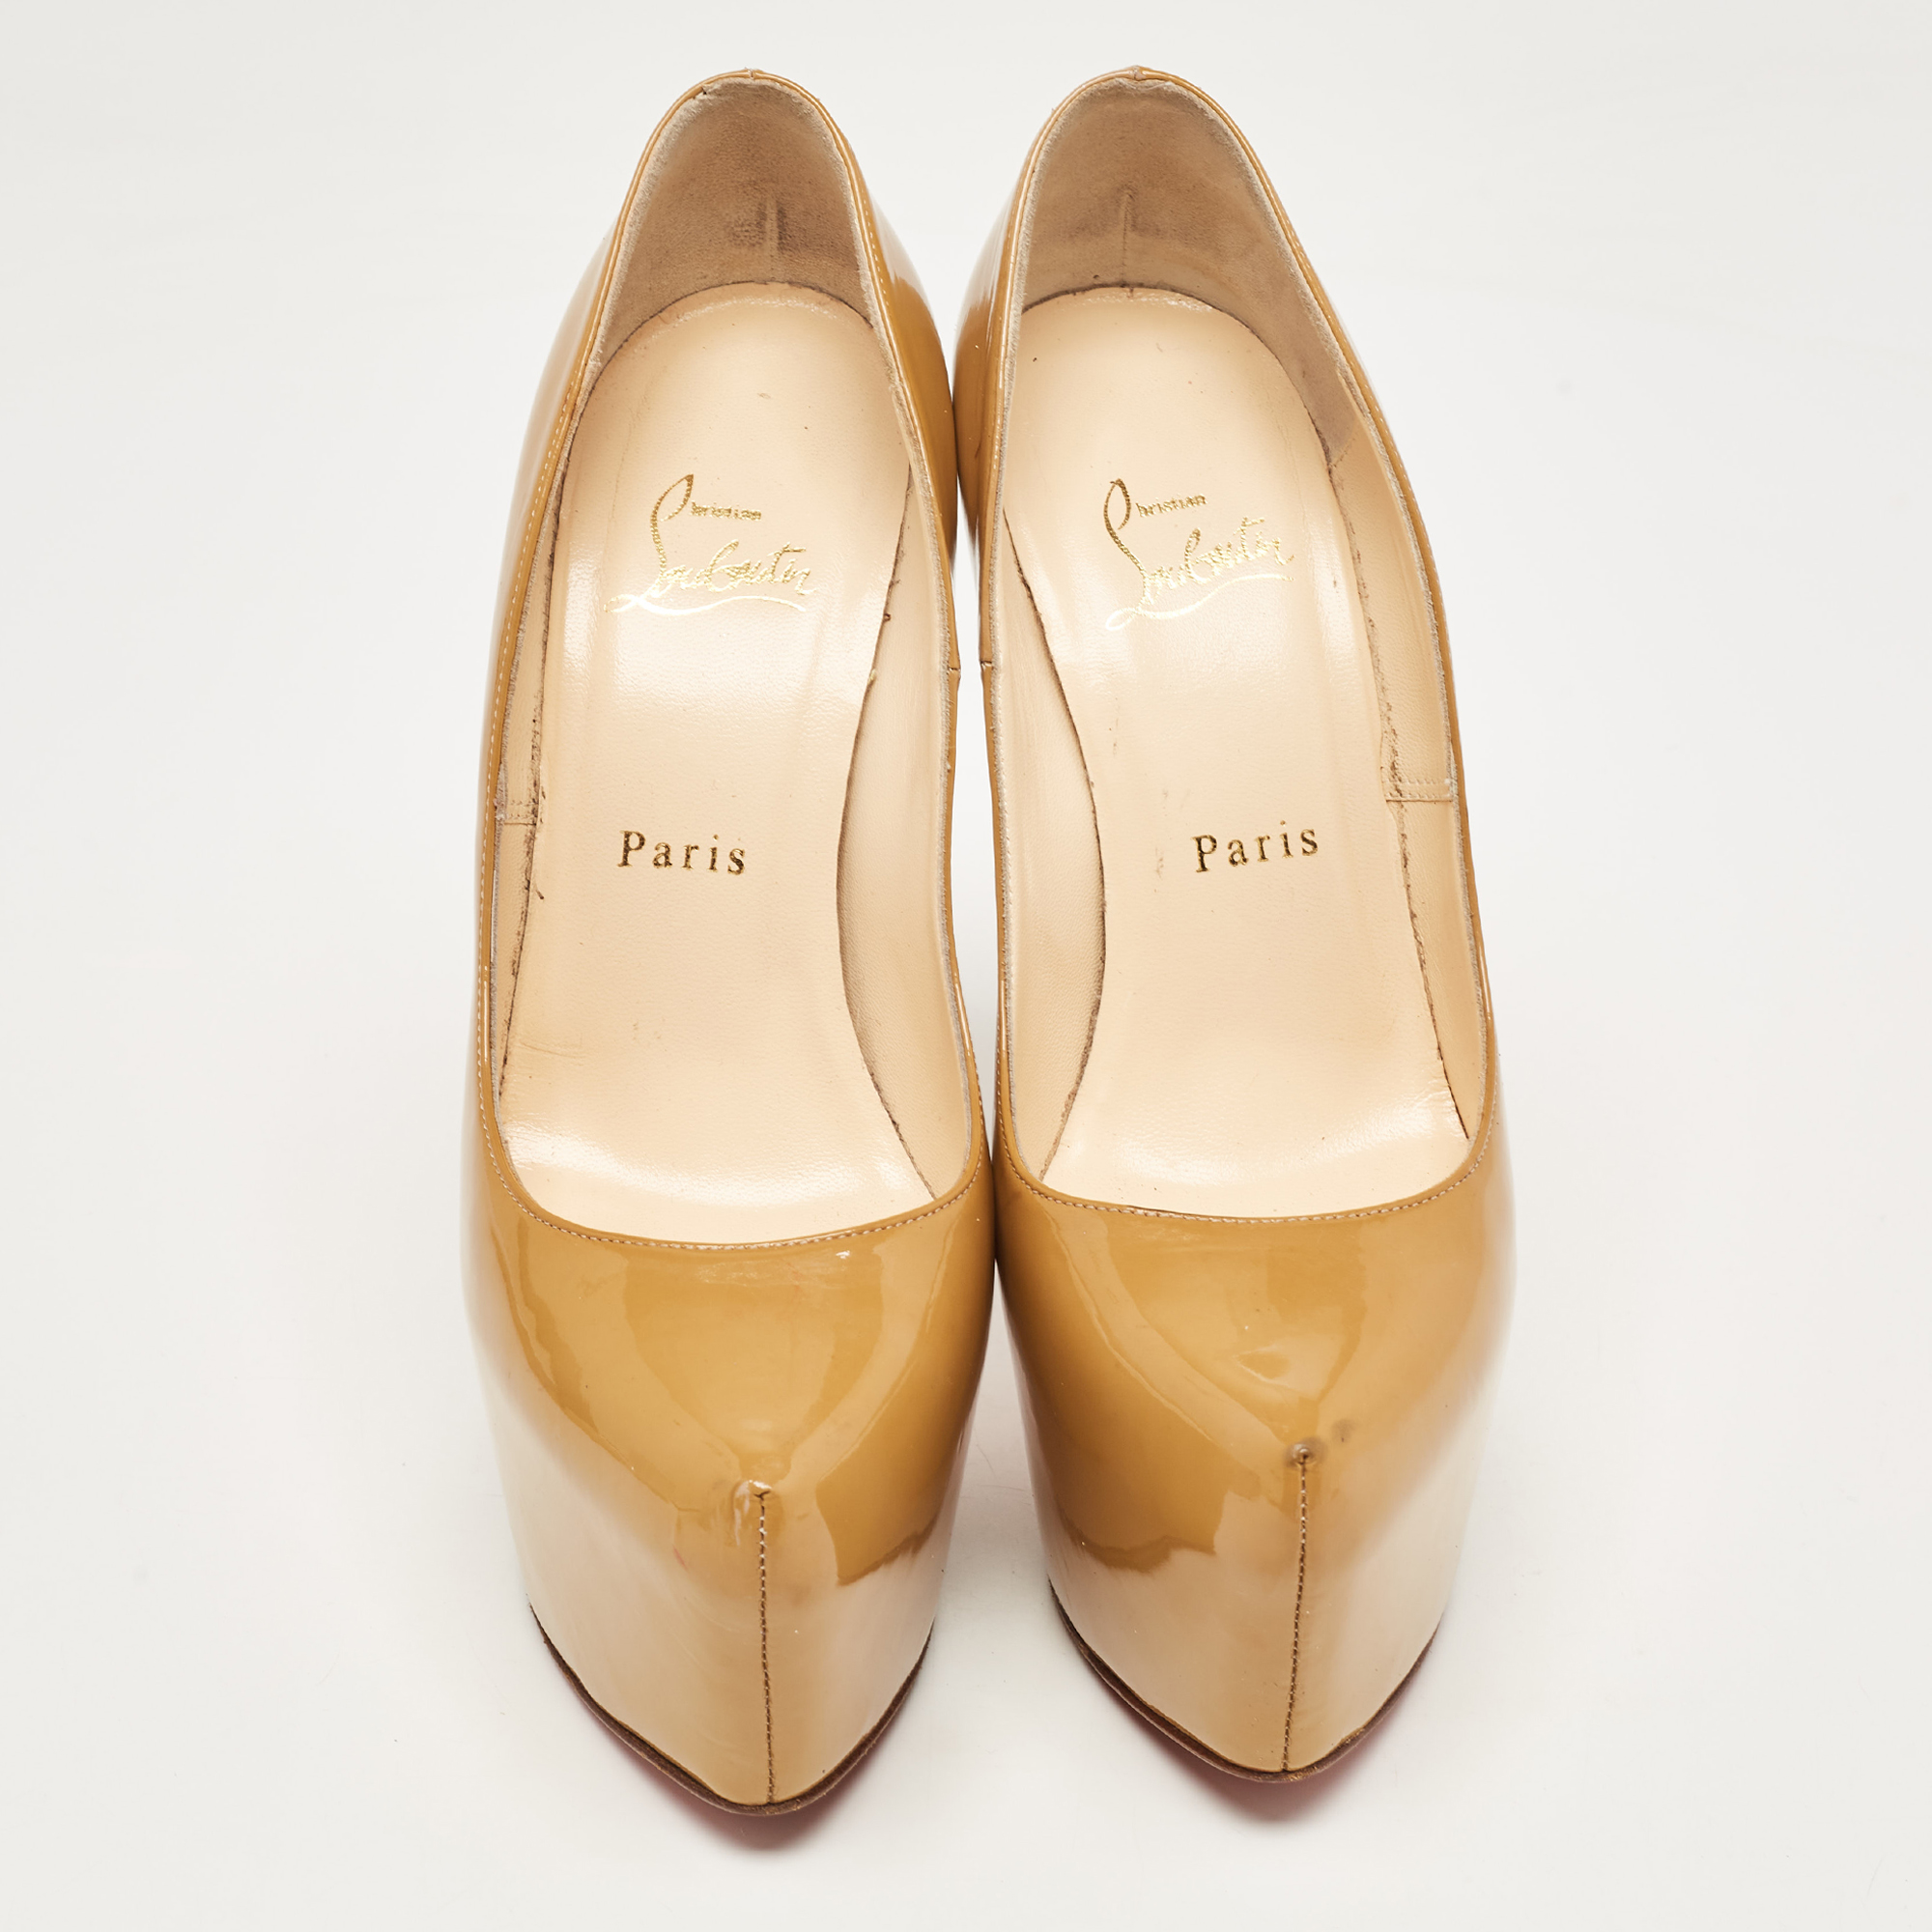 Christian Louboutin Beige Patent Leather Daffodile Pumps Size 38